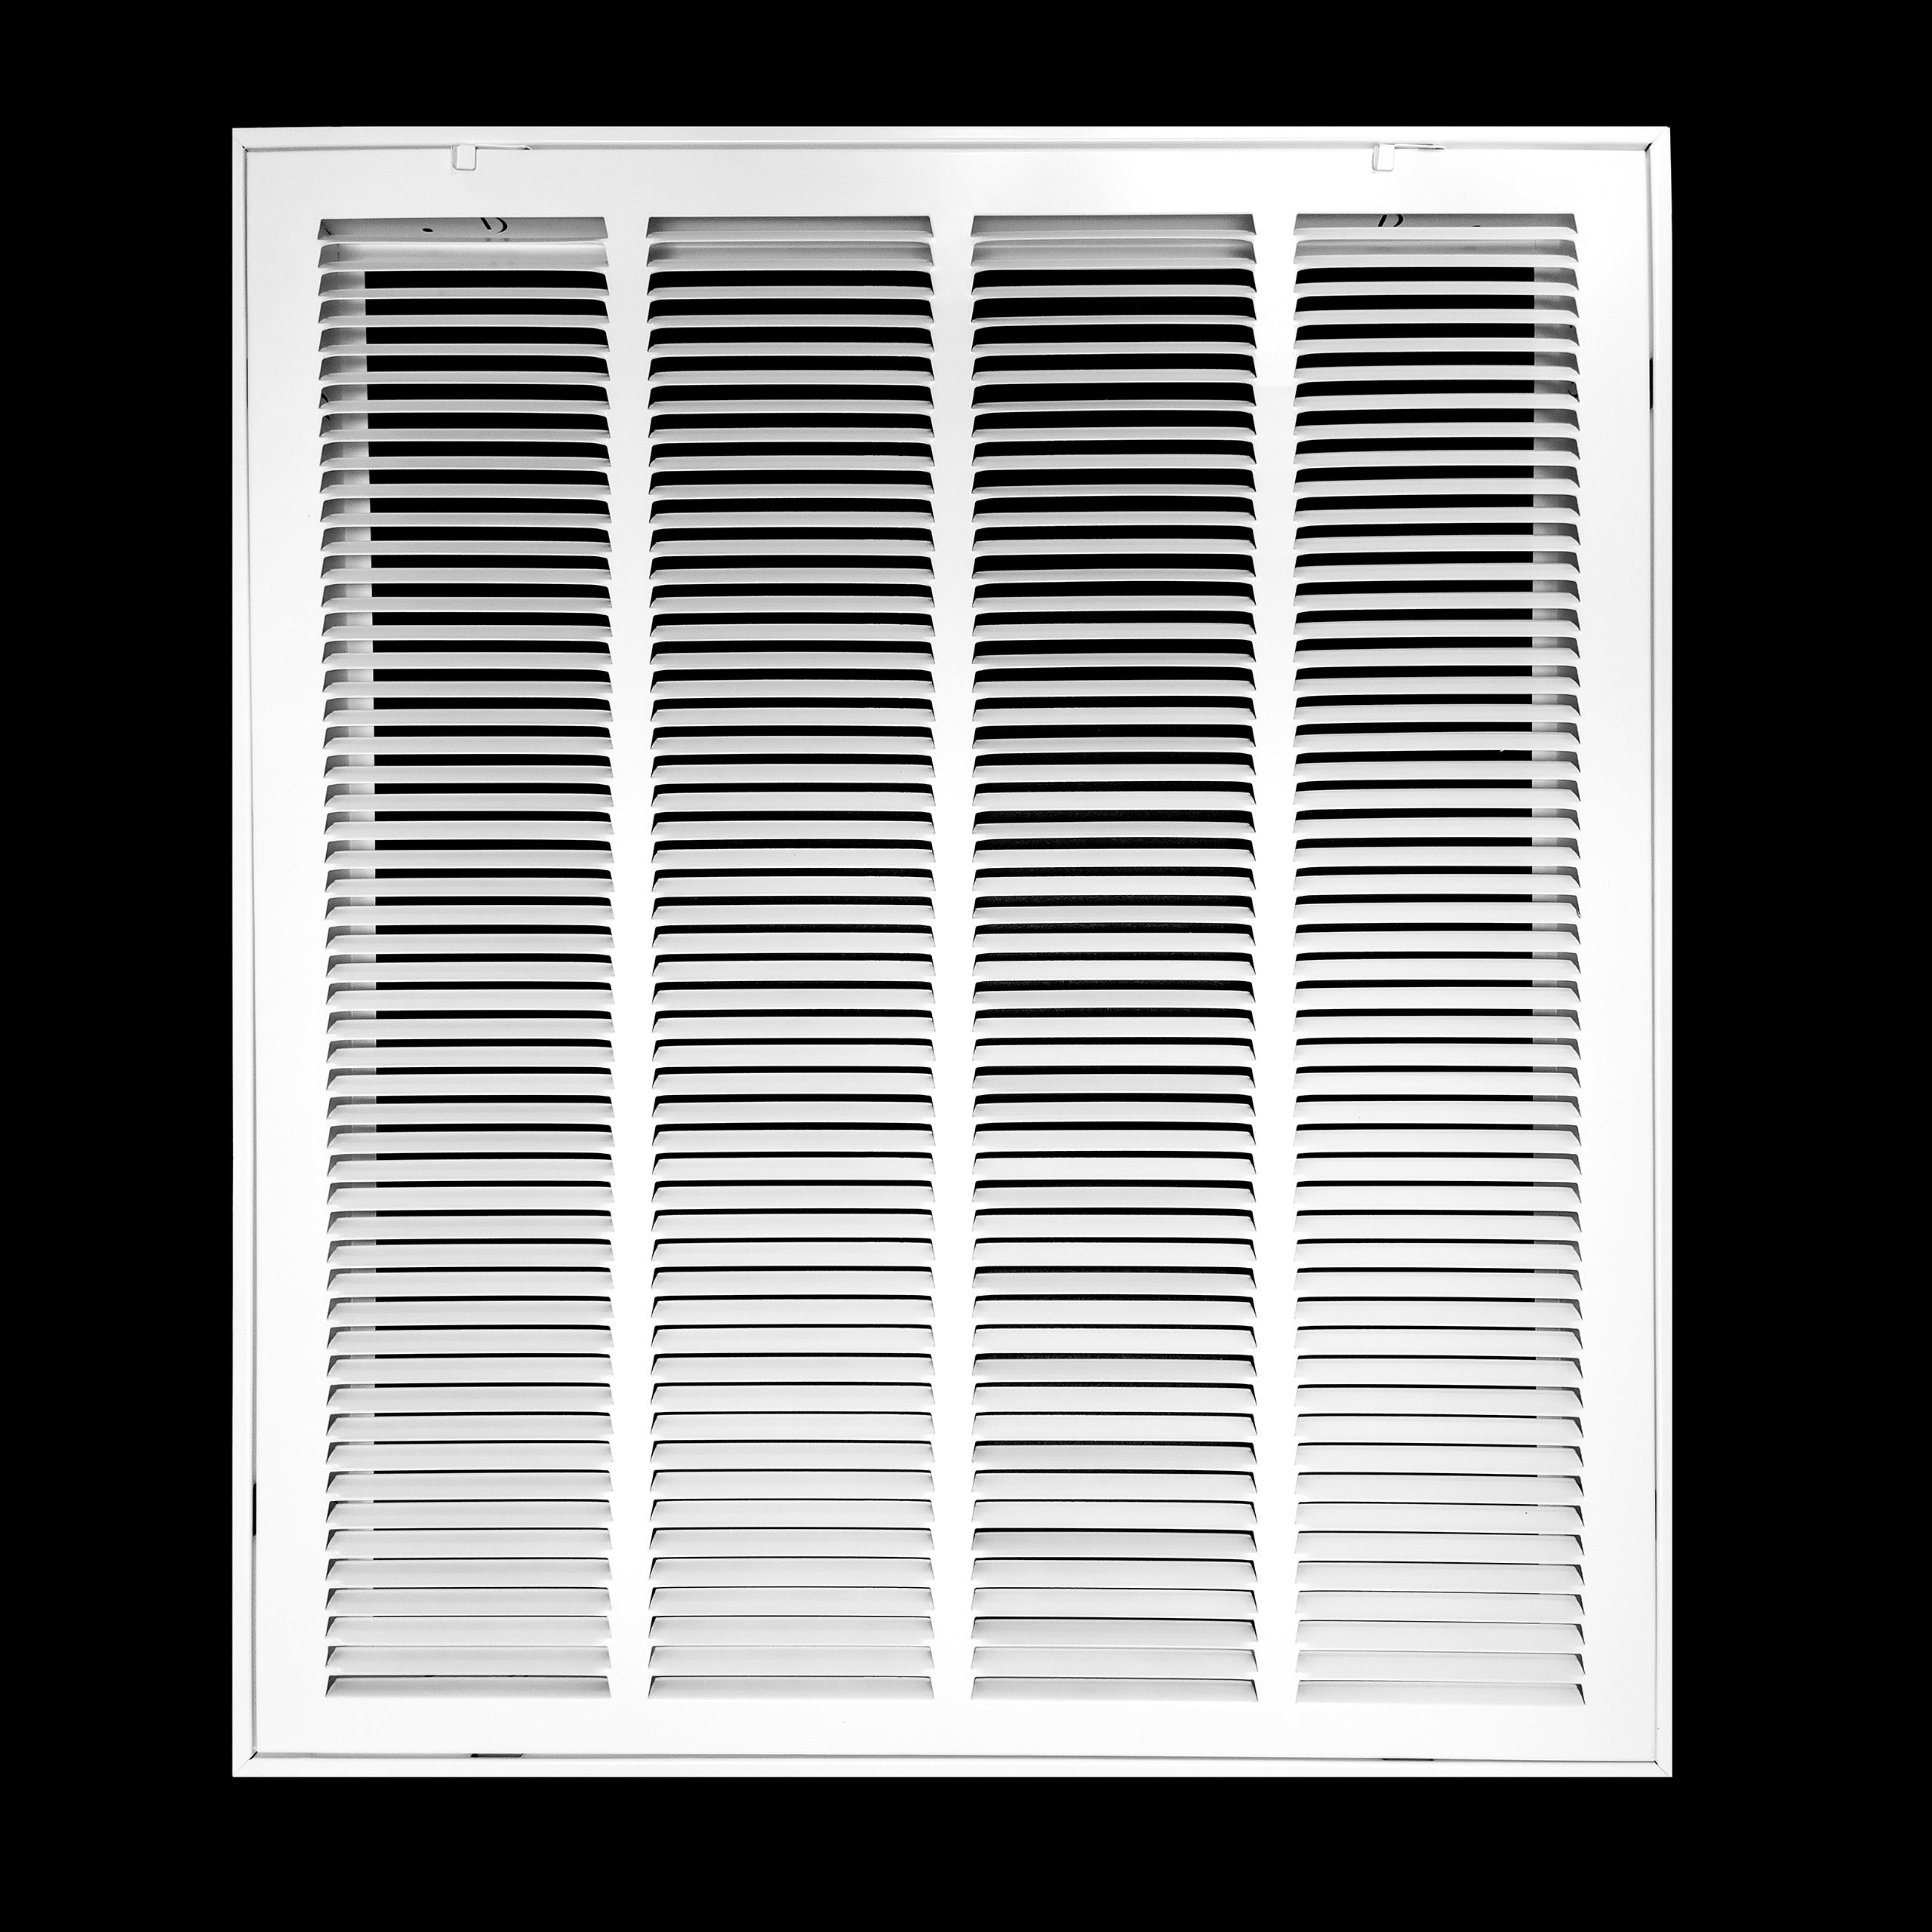 airgrilles 22" x 26" duct opening   hd steel return air filter grille for sidewall and ceiling 7hnd-rfg1-wh-22x26 038775638258 - 1